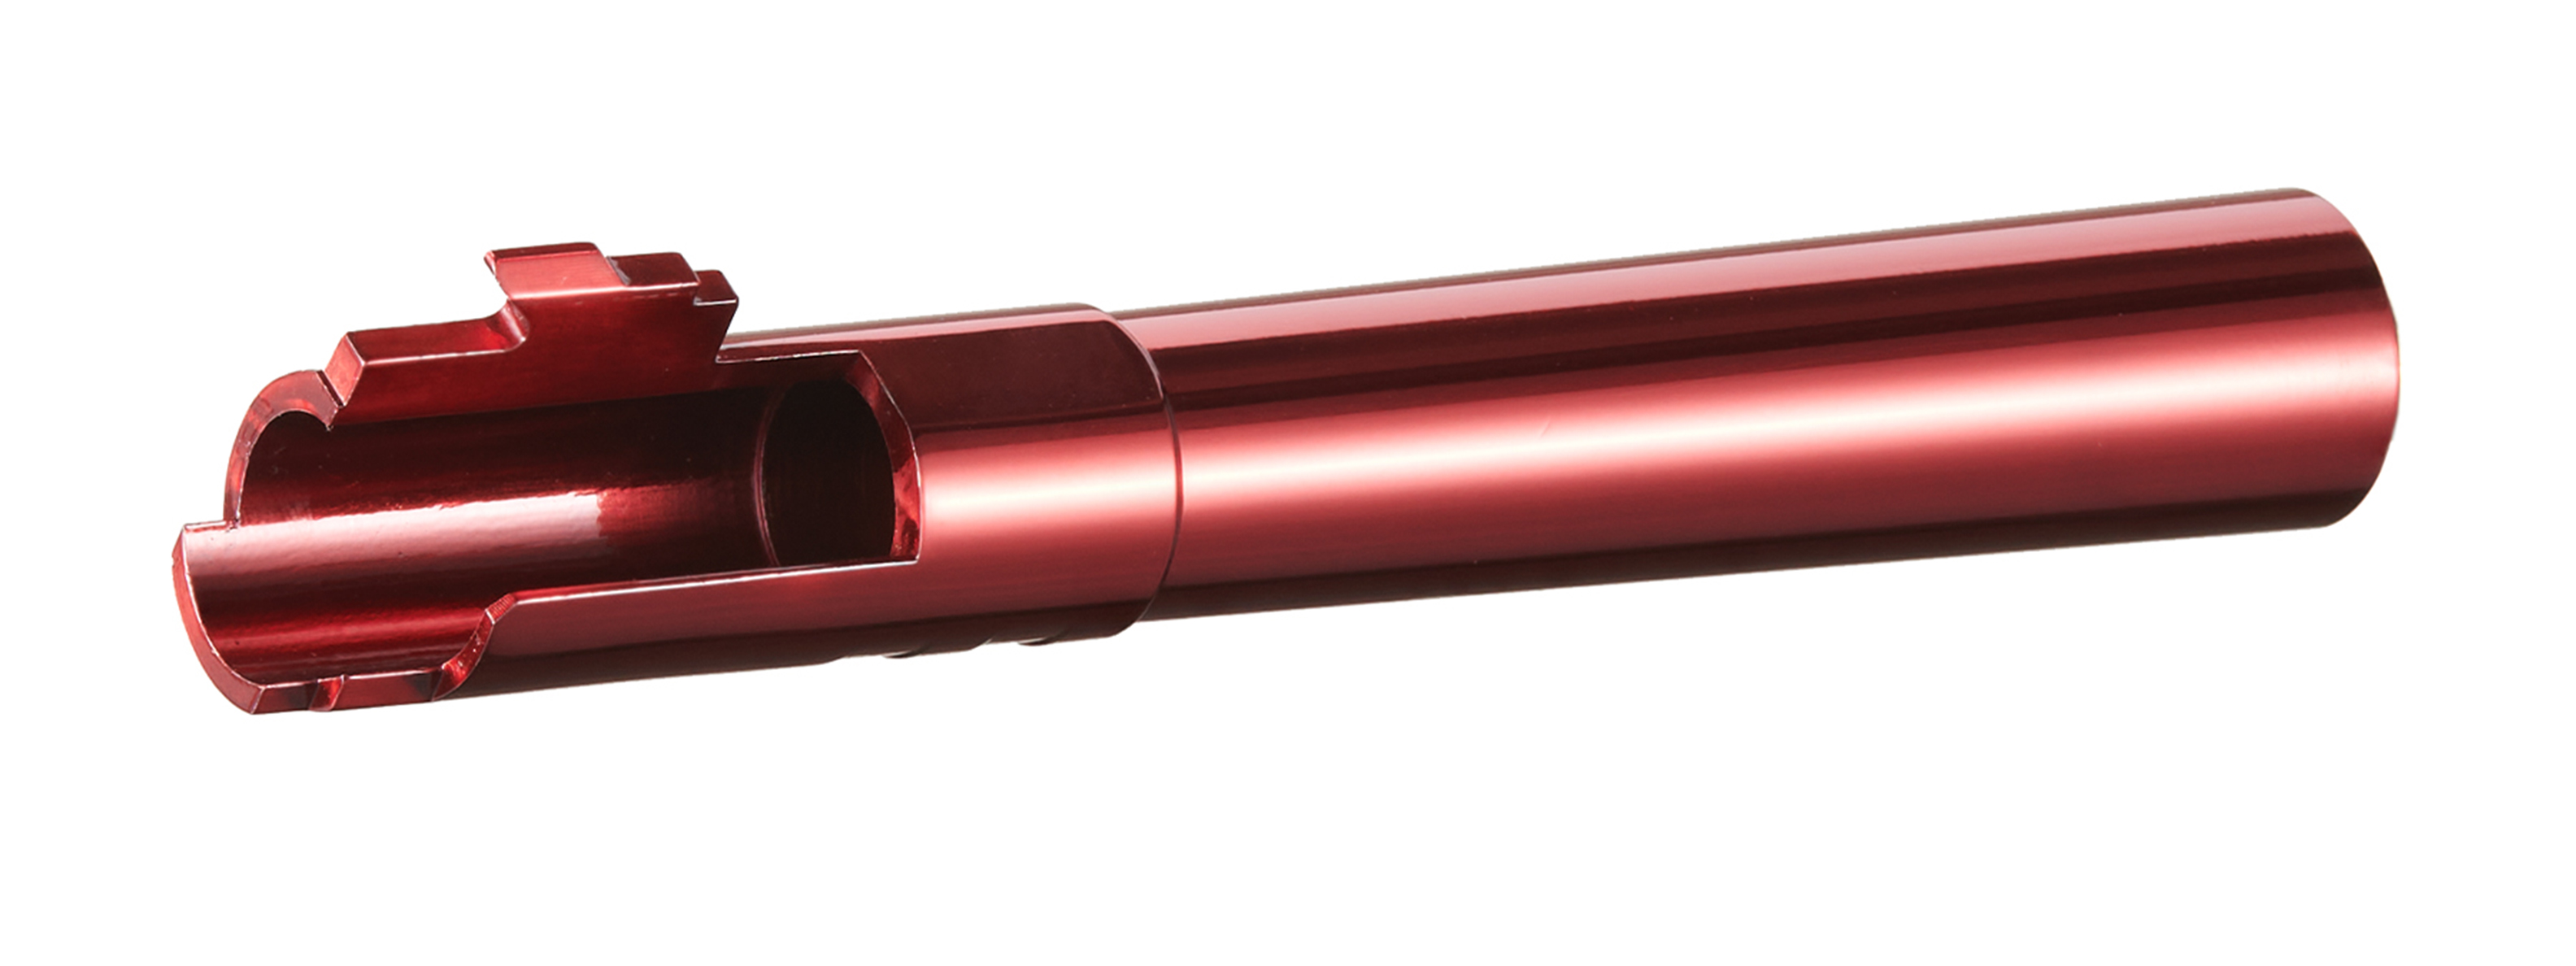 Lancer Tactical Stainless Steel Threaded Outer Barrel for 5.1 Hi-Capa Pistols (Red)